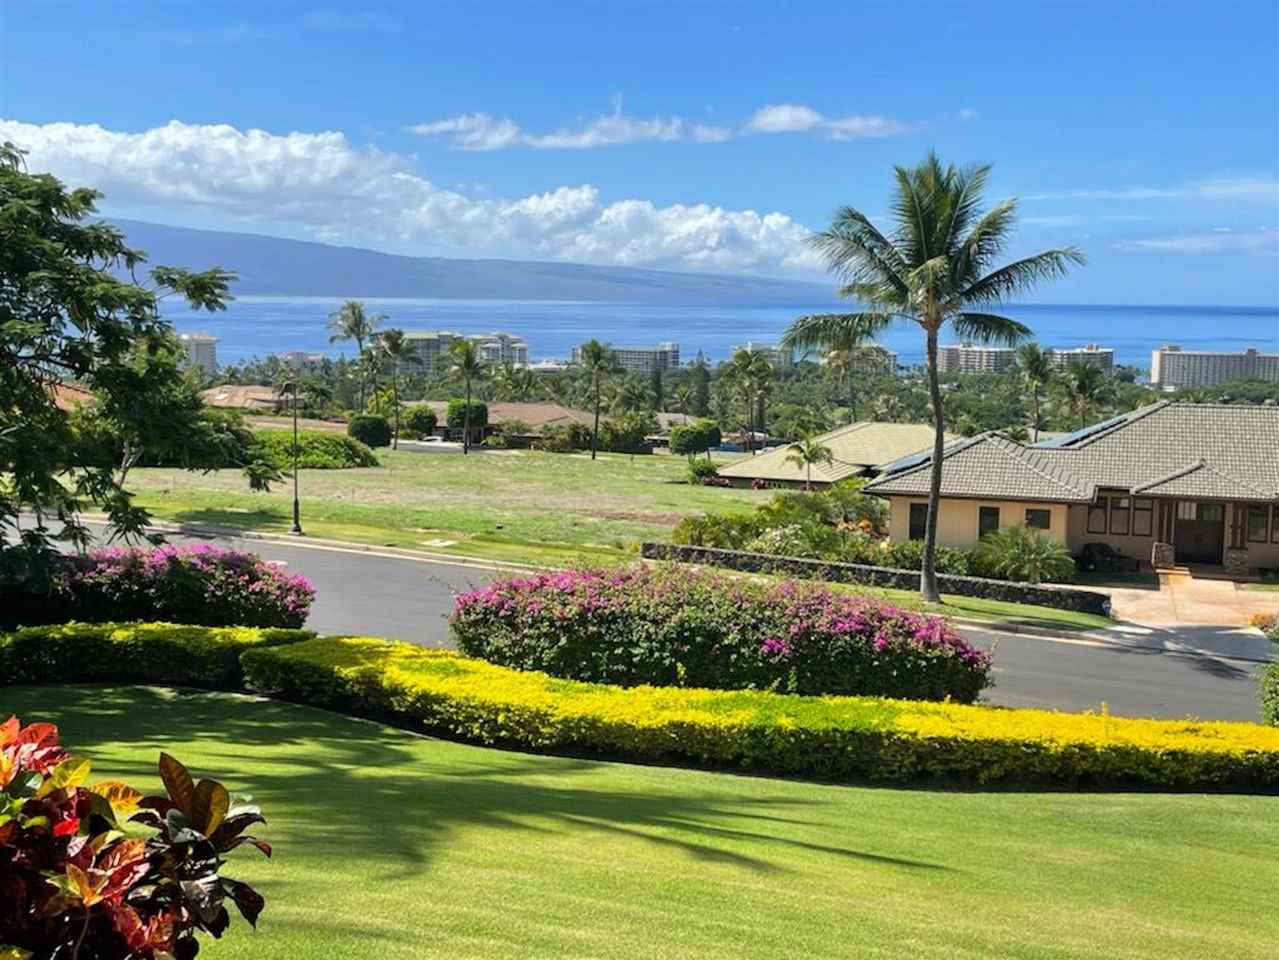 65 Lolii Pl  Lahaina, Hi vacant land for sale - photo 6 of 10